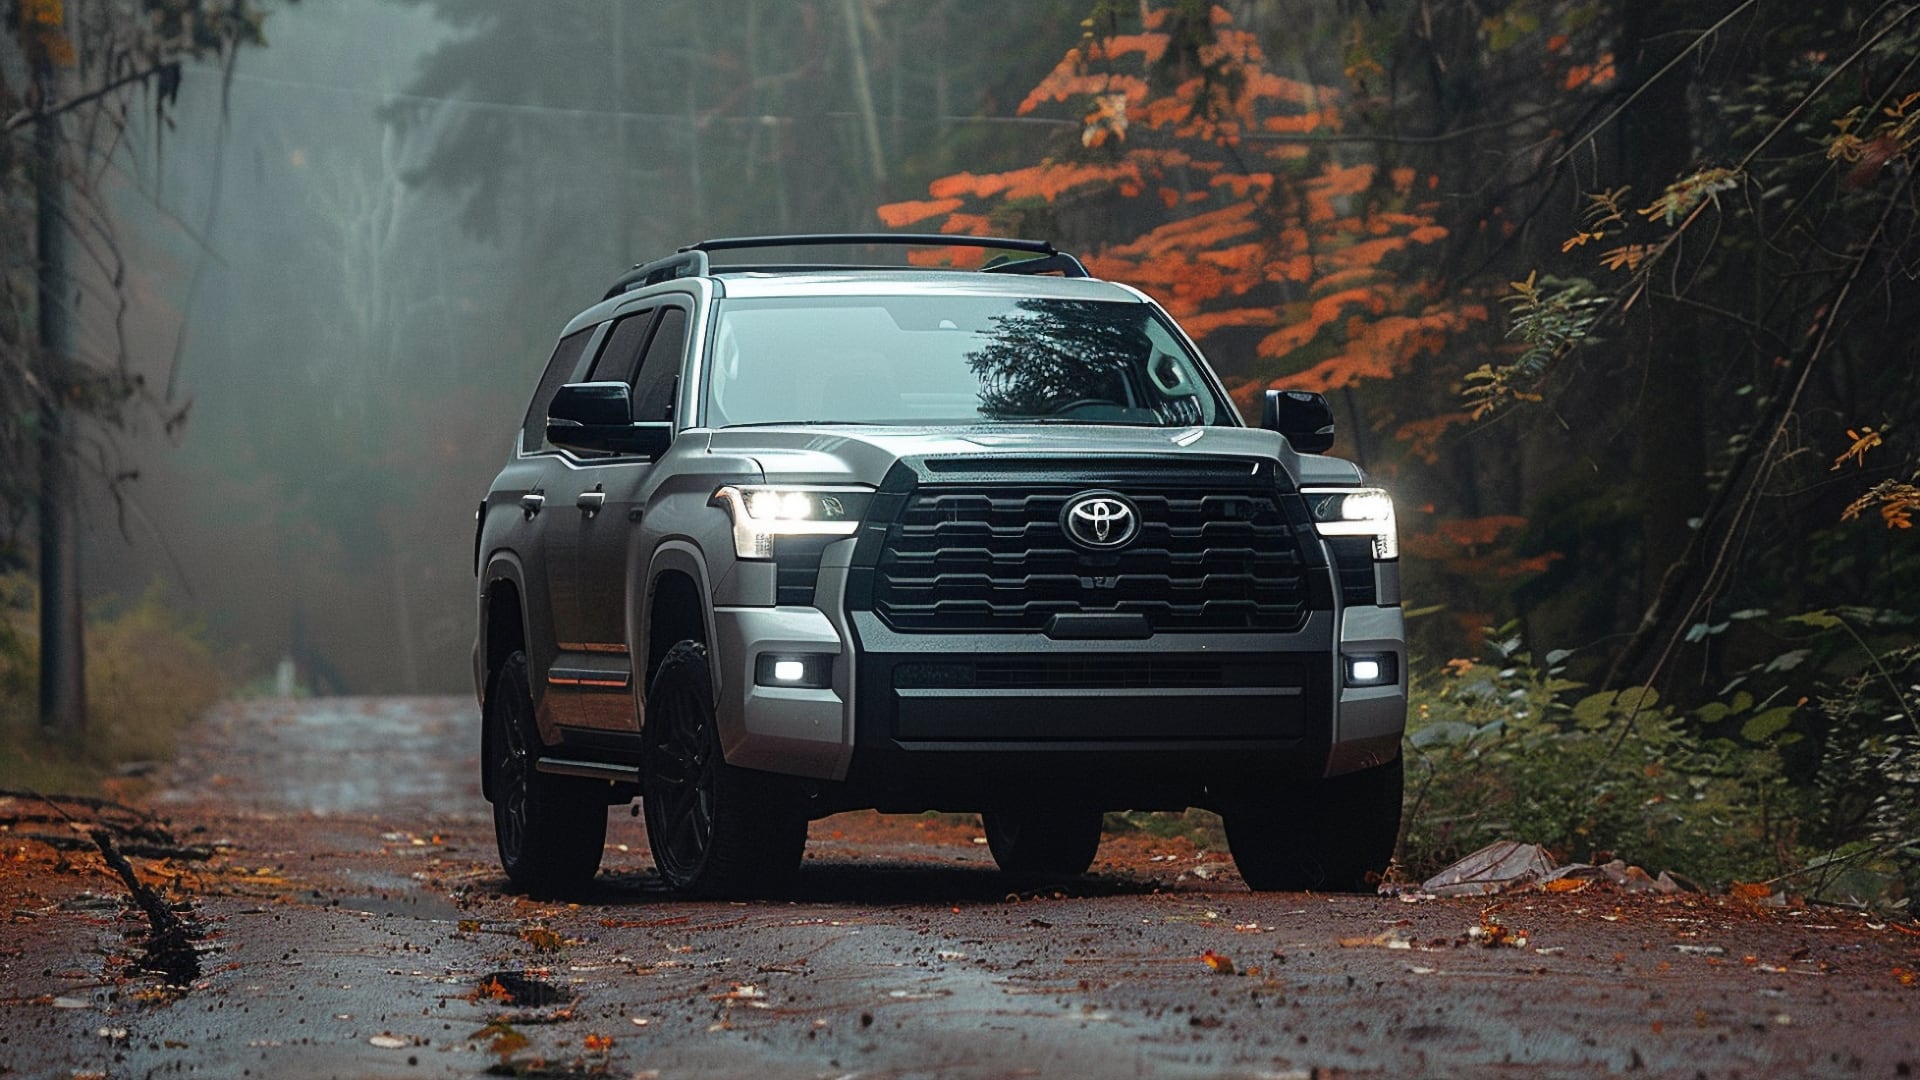 The 2020 Toyota Sequoia is driving down a road in the woods.